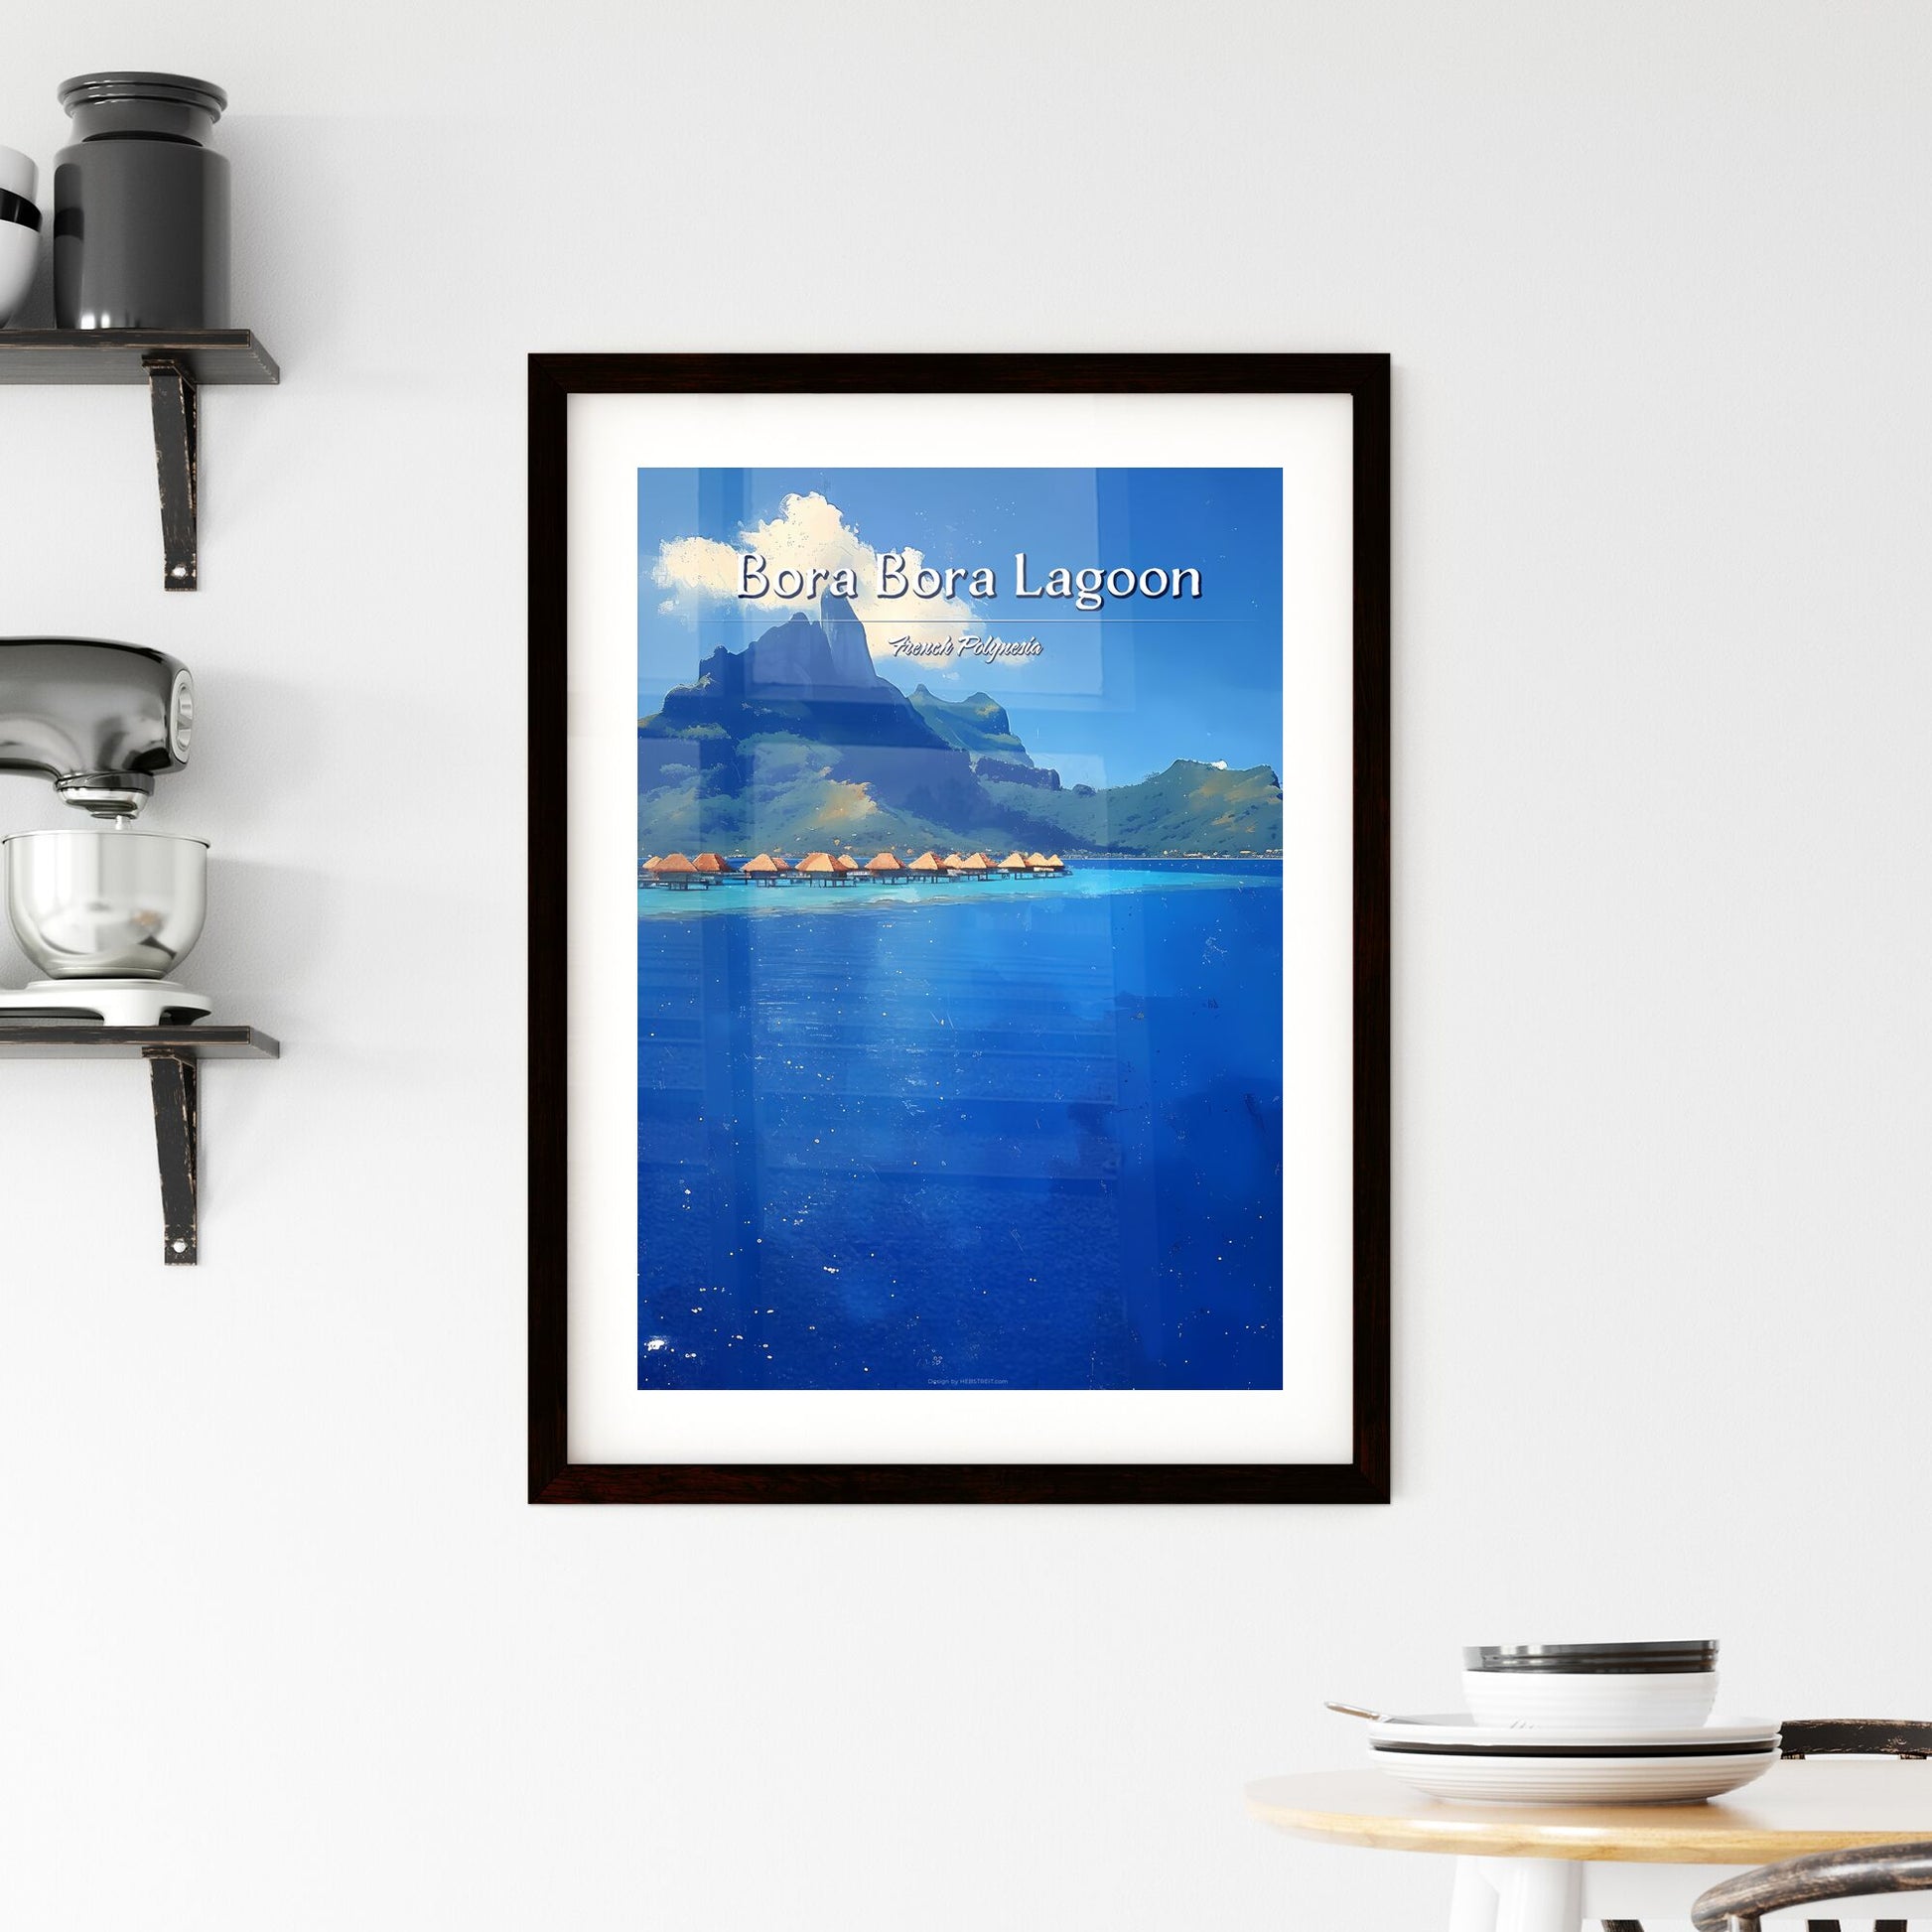 Bora Bora Lagoon, French Polynesia - Art print of a group of people in a large room with columns Default Title